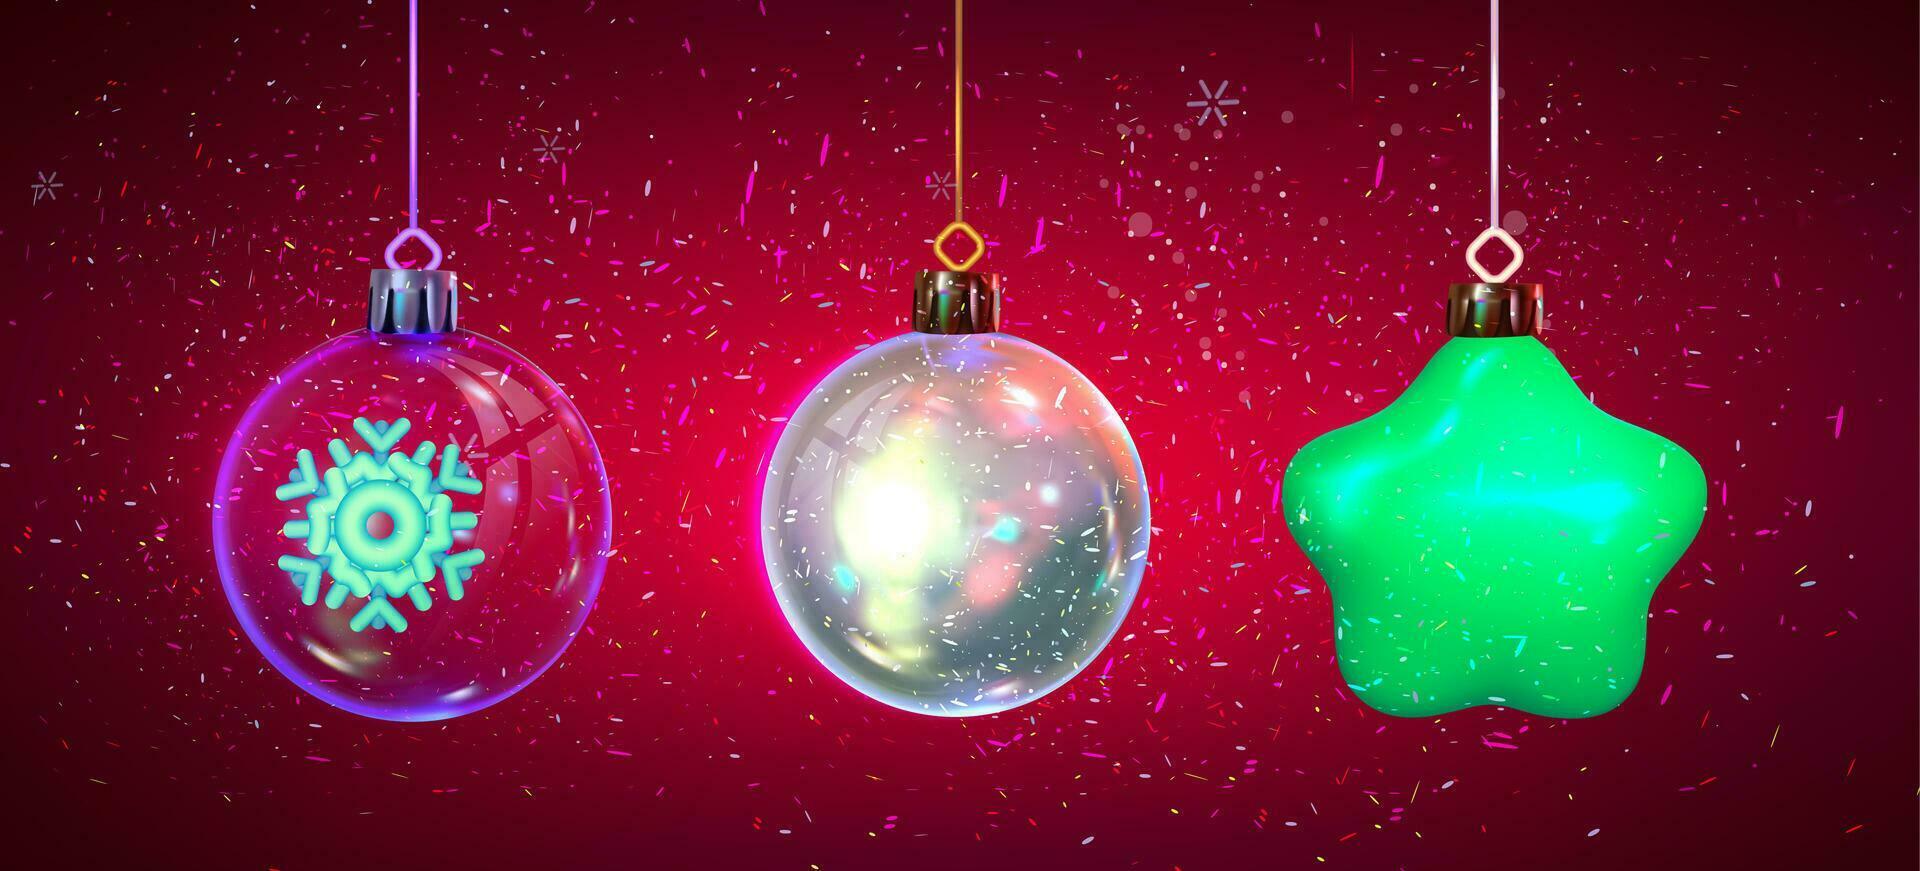 Merry Christmas and Happy New Year. Set of colorful Christmas balls.  Vector illustration. Eps 10